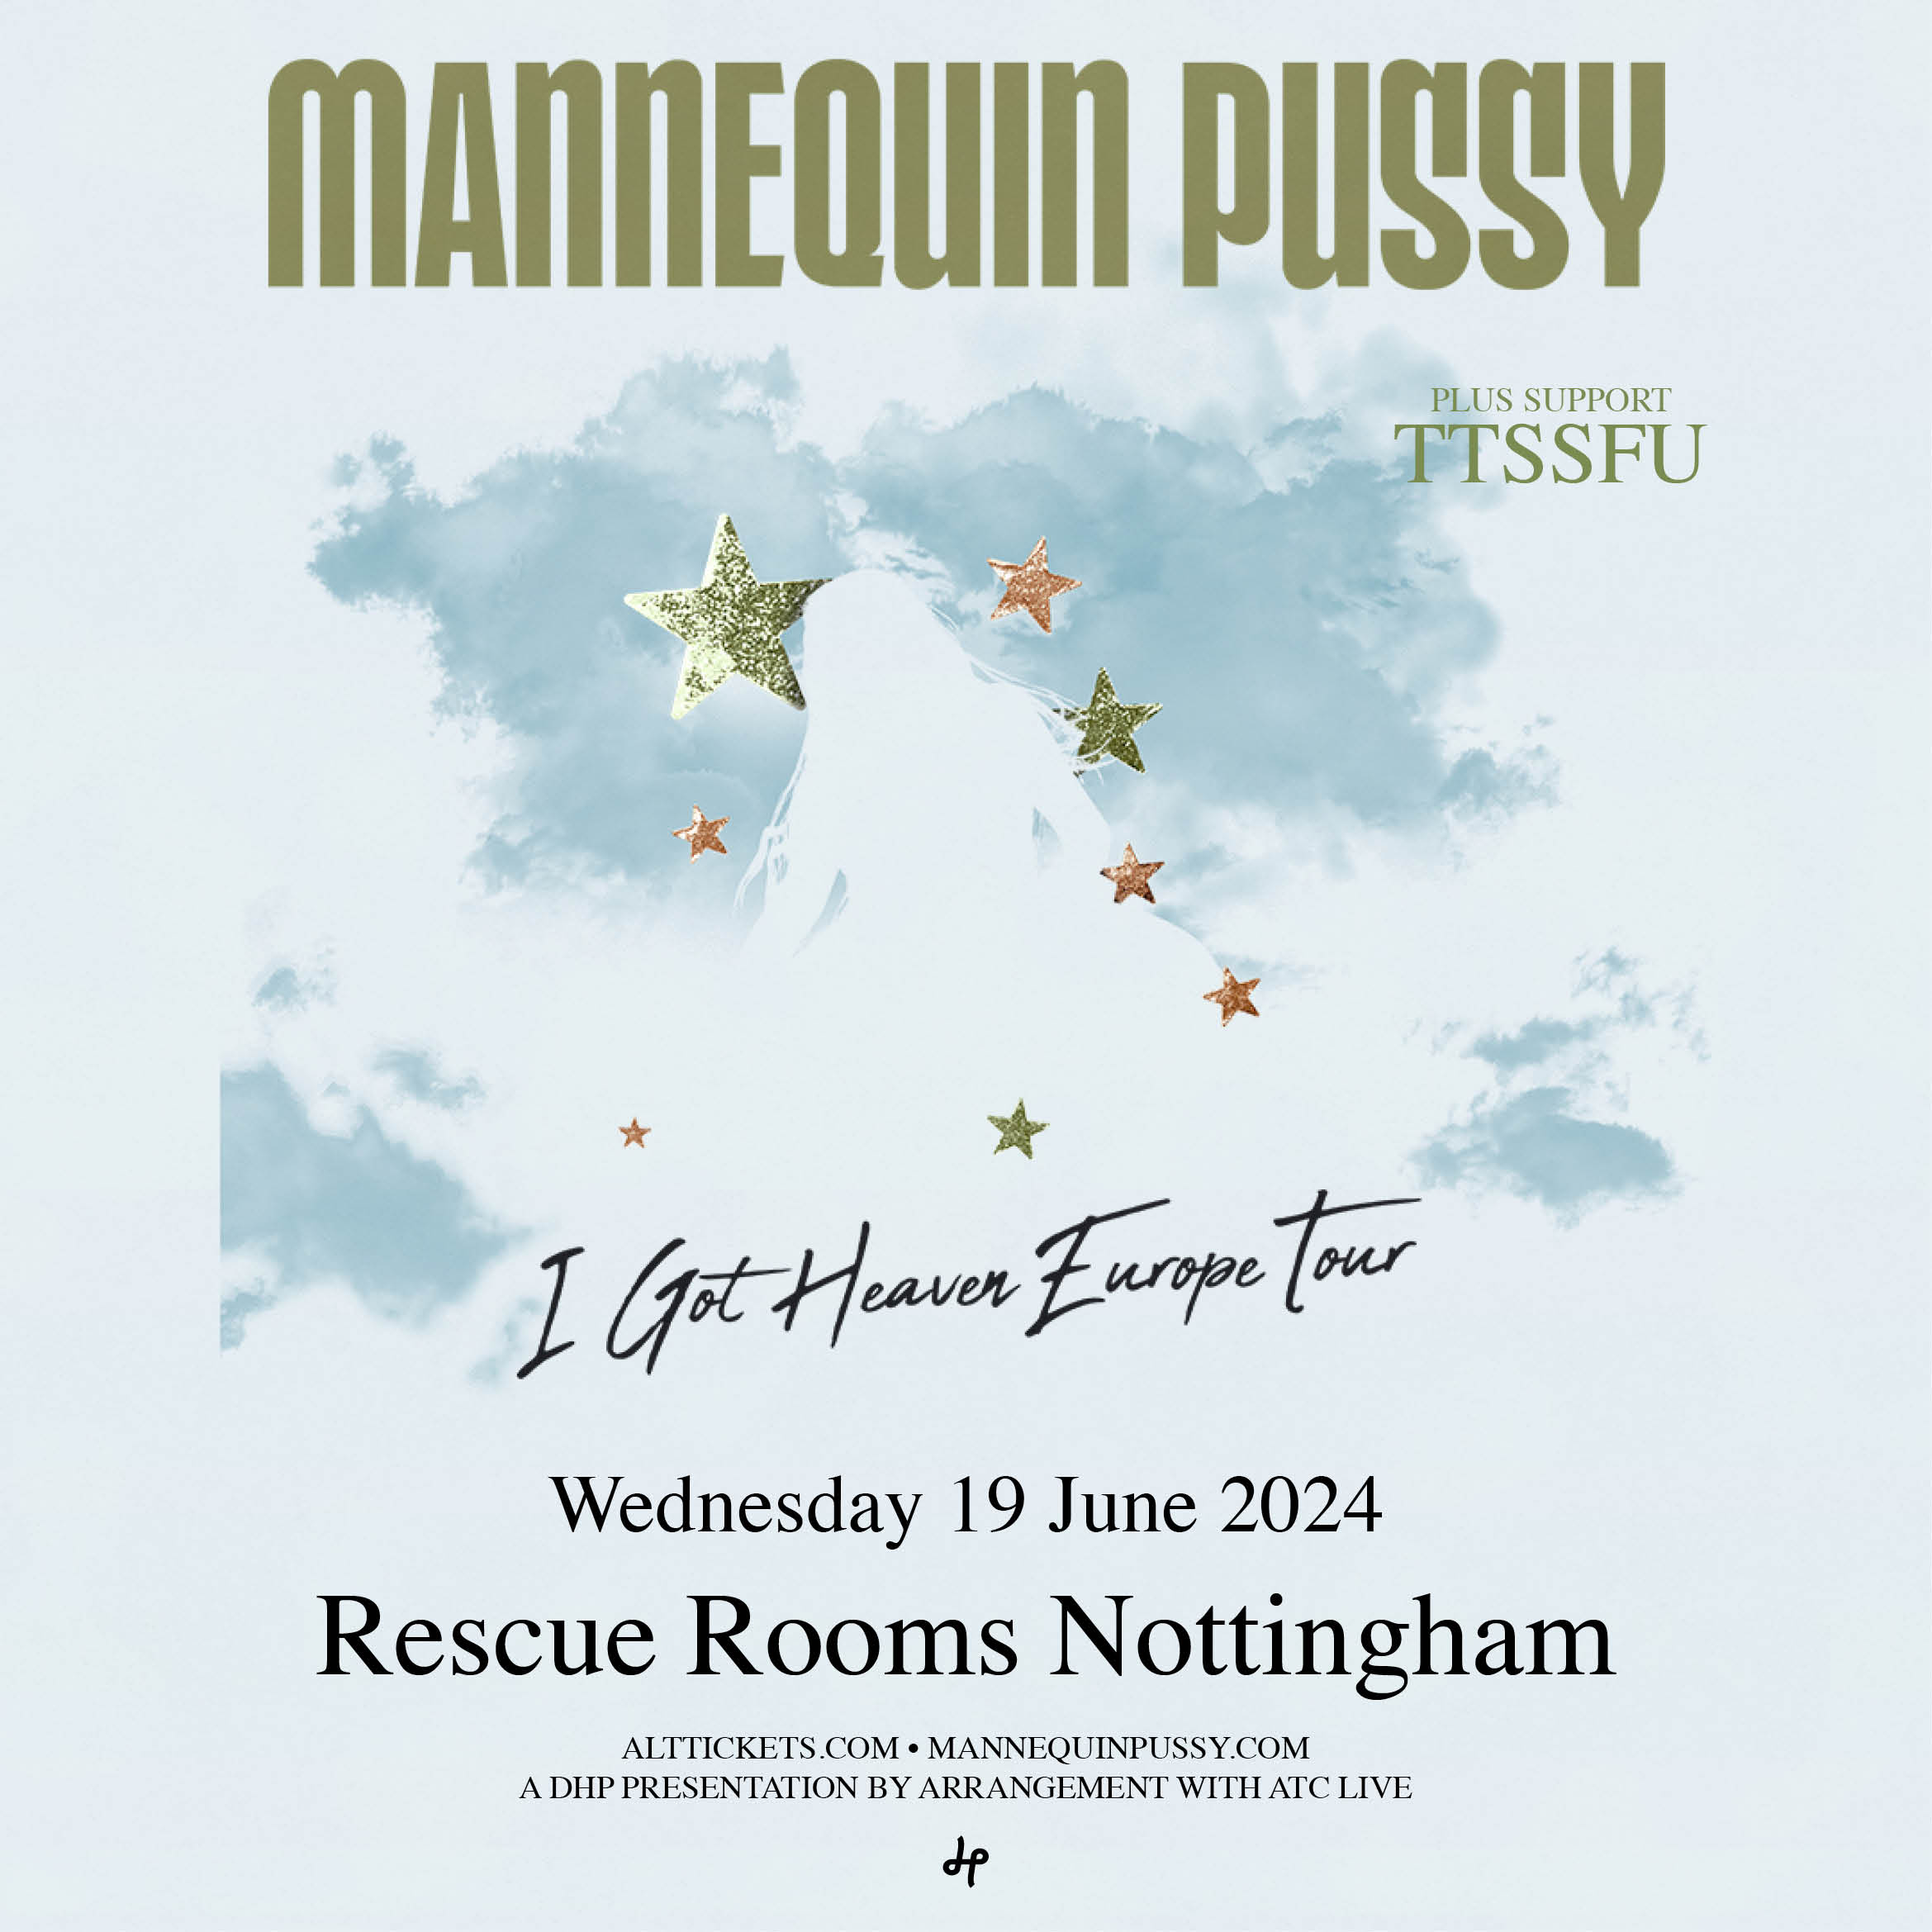 MANNEQUIN PUSSY POSTER